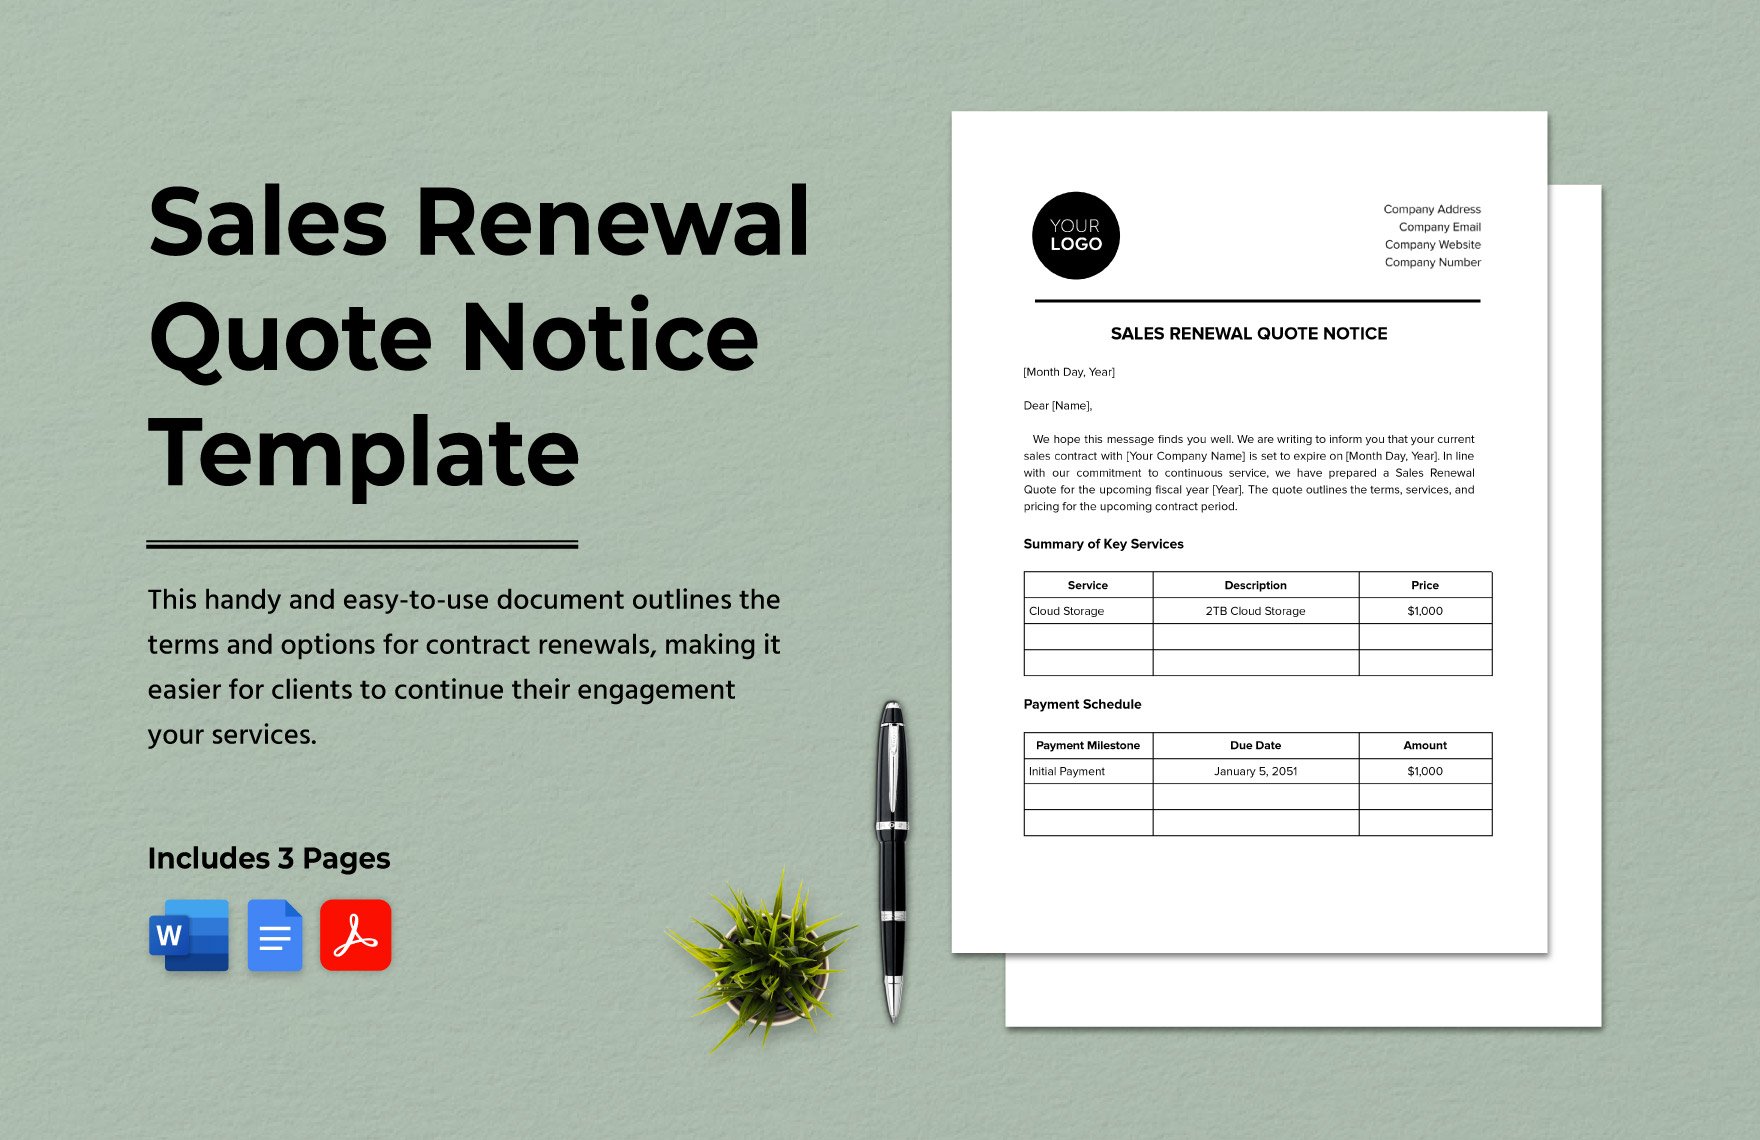 Sales Renewal Quote Notice Template in Word, Google Docs, PDF